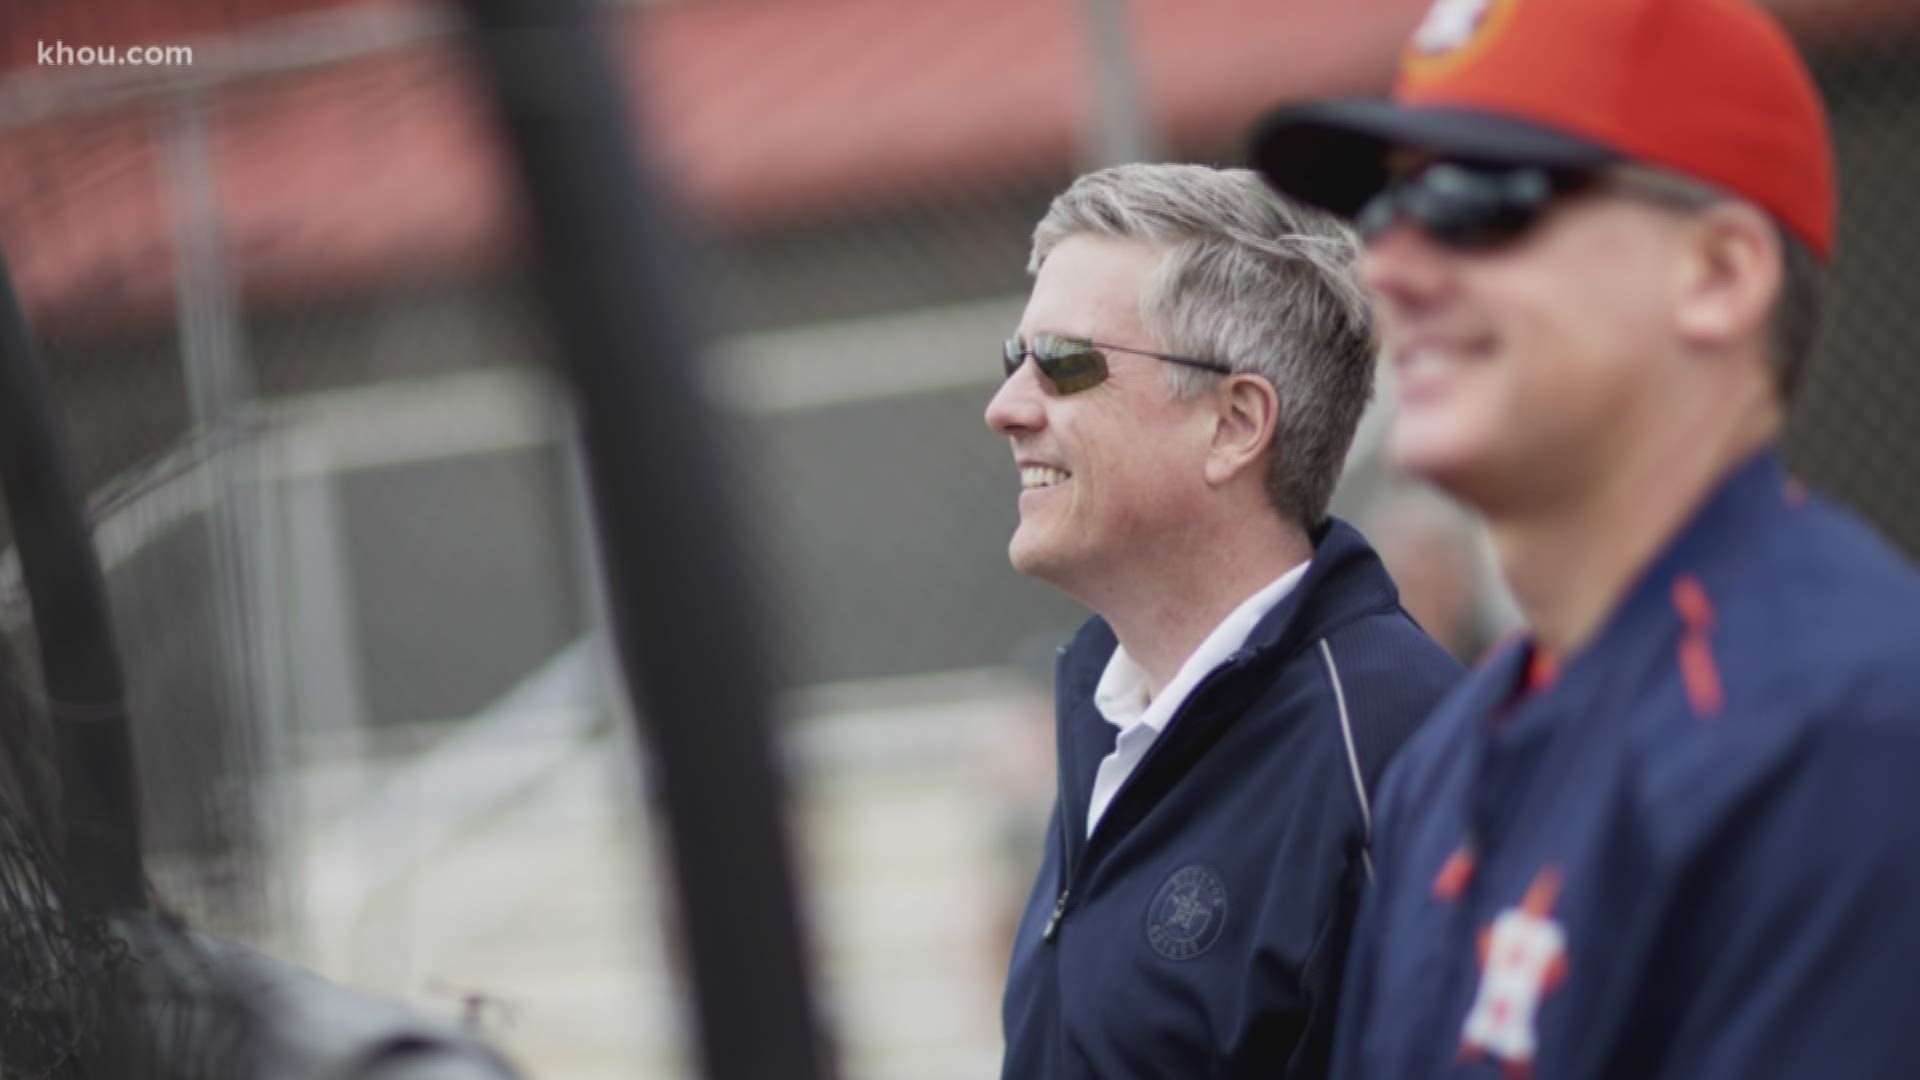 Astros owner Jim Crane said manager A.J. Hinch and GM Jeff Luhnow will not return to the team. He fired both of them because of the 2017 cheating scandal.